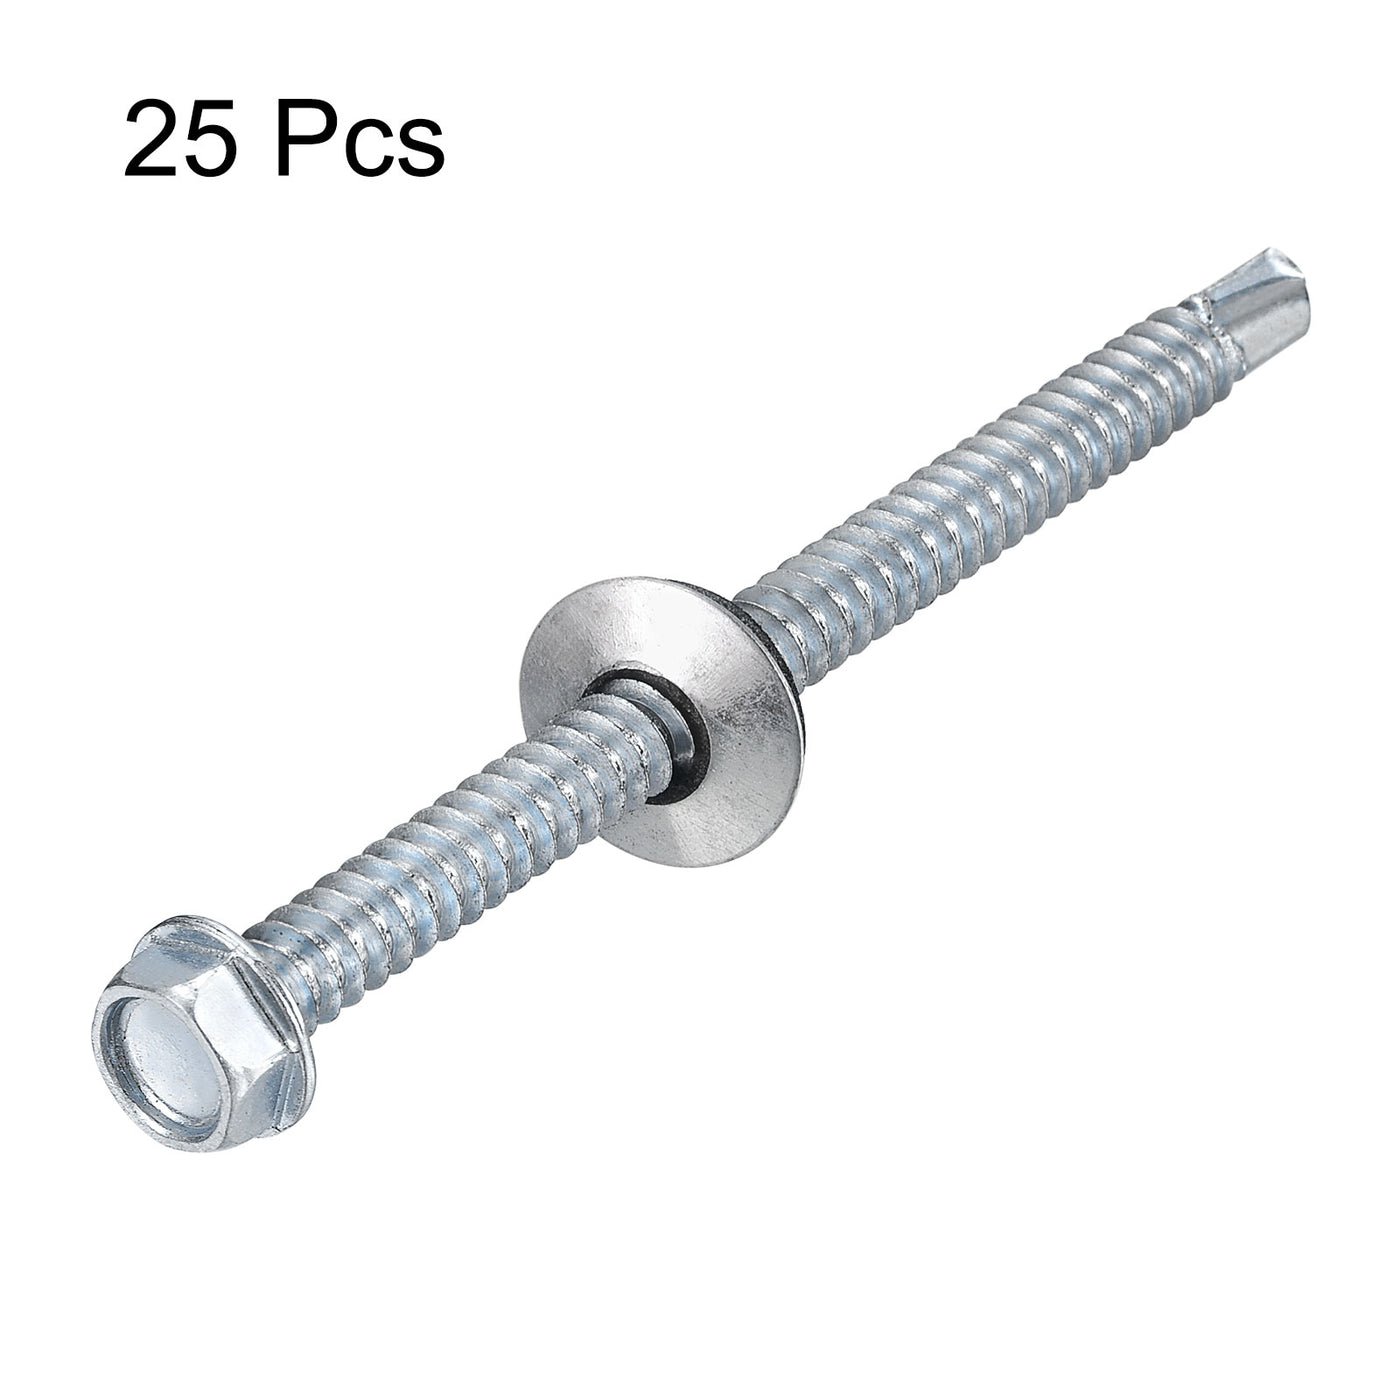 uxcell Uxcell #14 x 3-9/16" Self Drilling Screws, 25pcs Roofing Screws with EPDM Washer